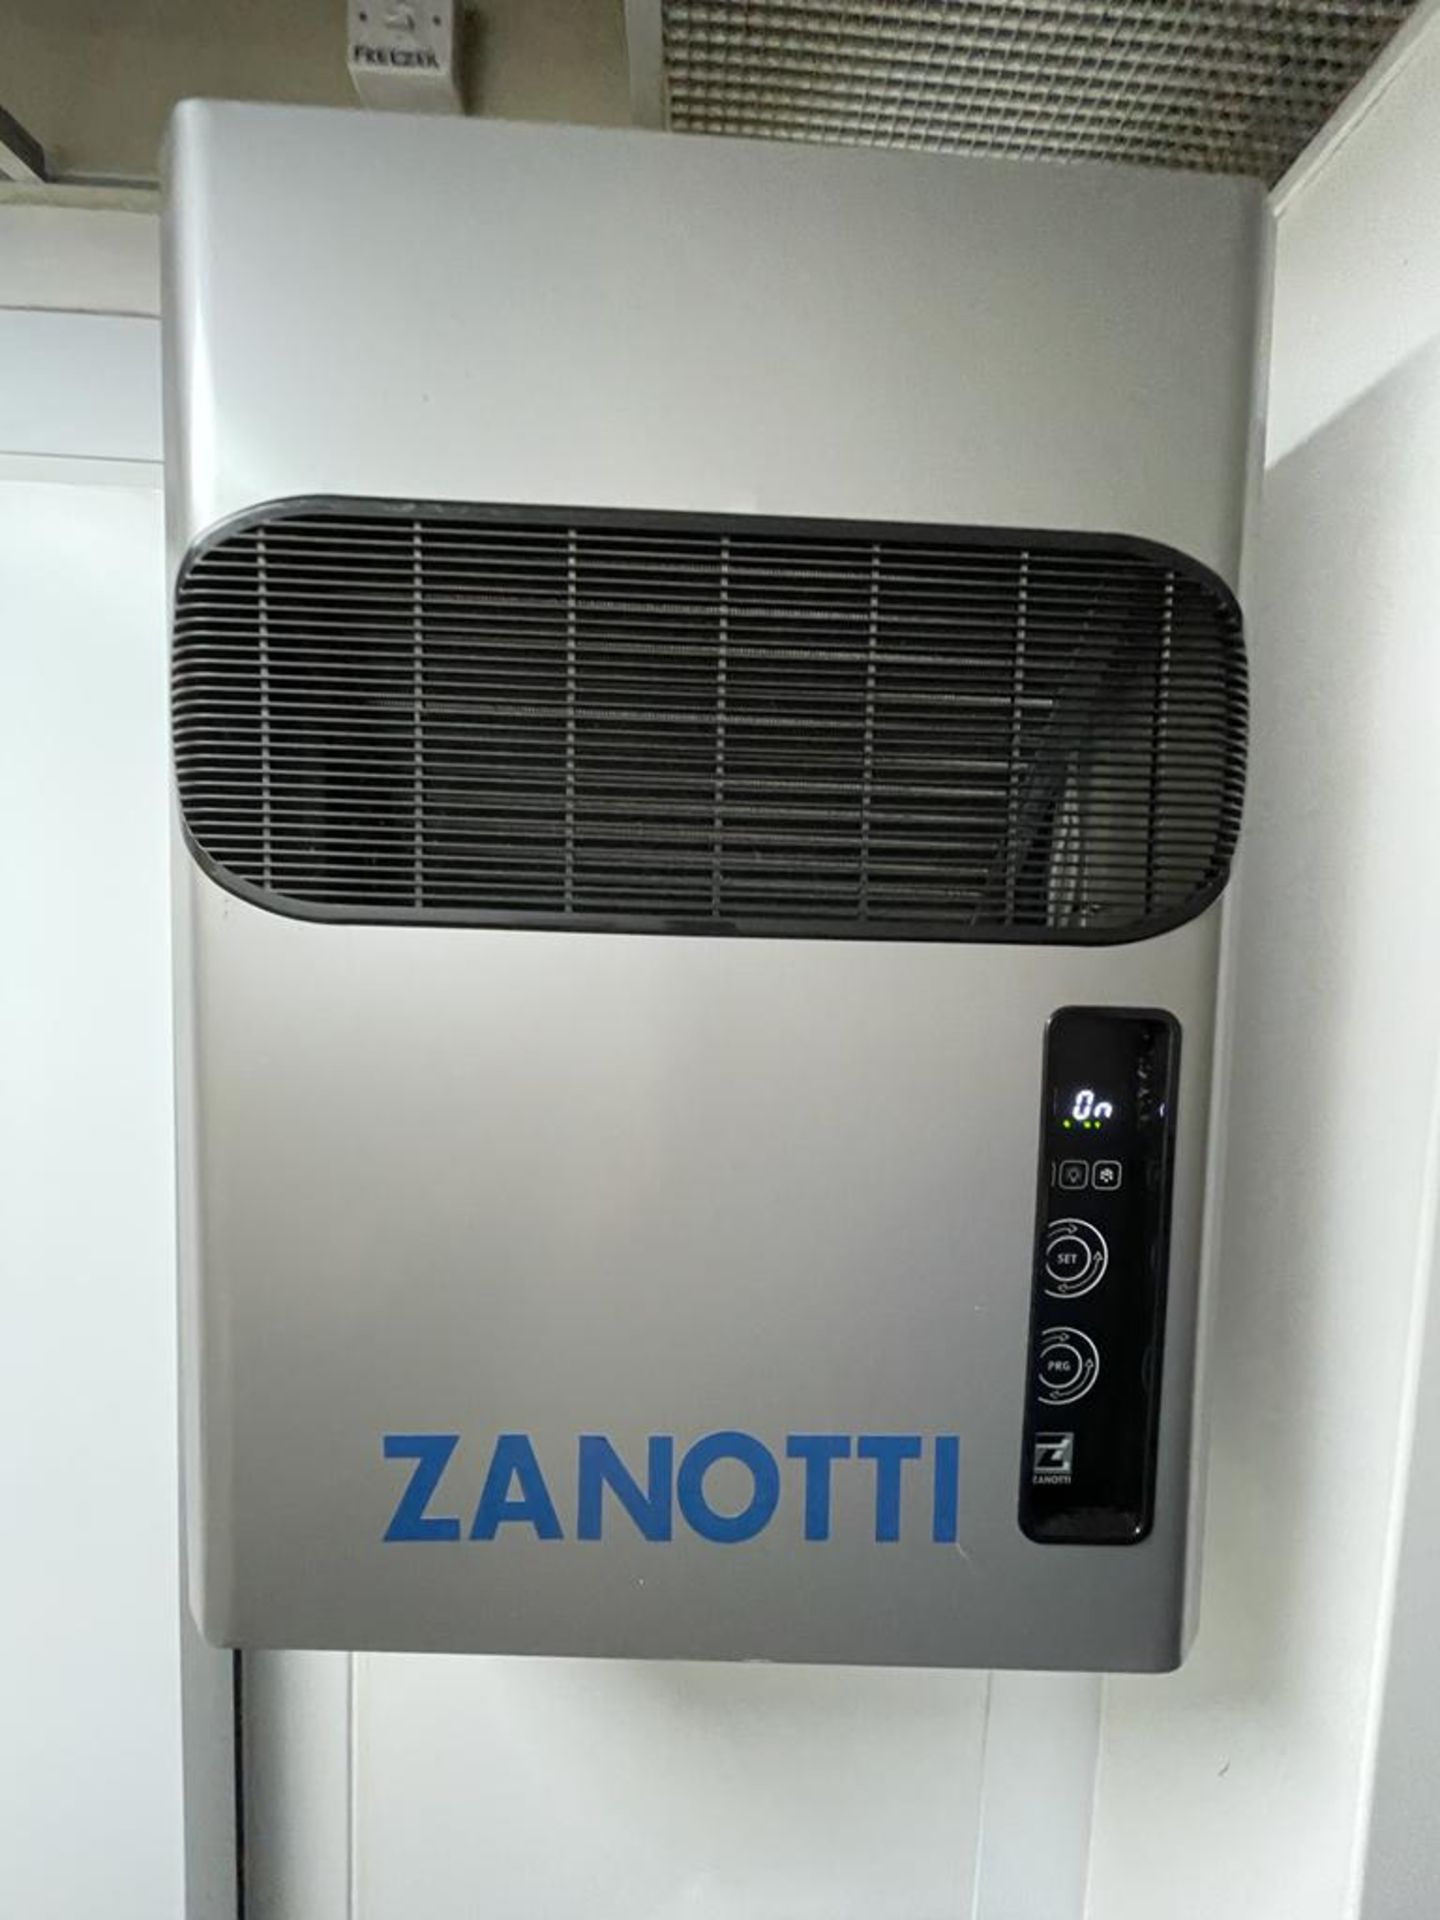 1 x Walk In Refrigerated Cold and Freezer With Zanotti Control Units - Ref: BK249 - CL686 - - Image 22 of 24